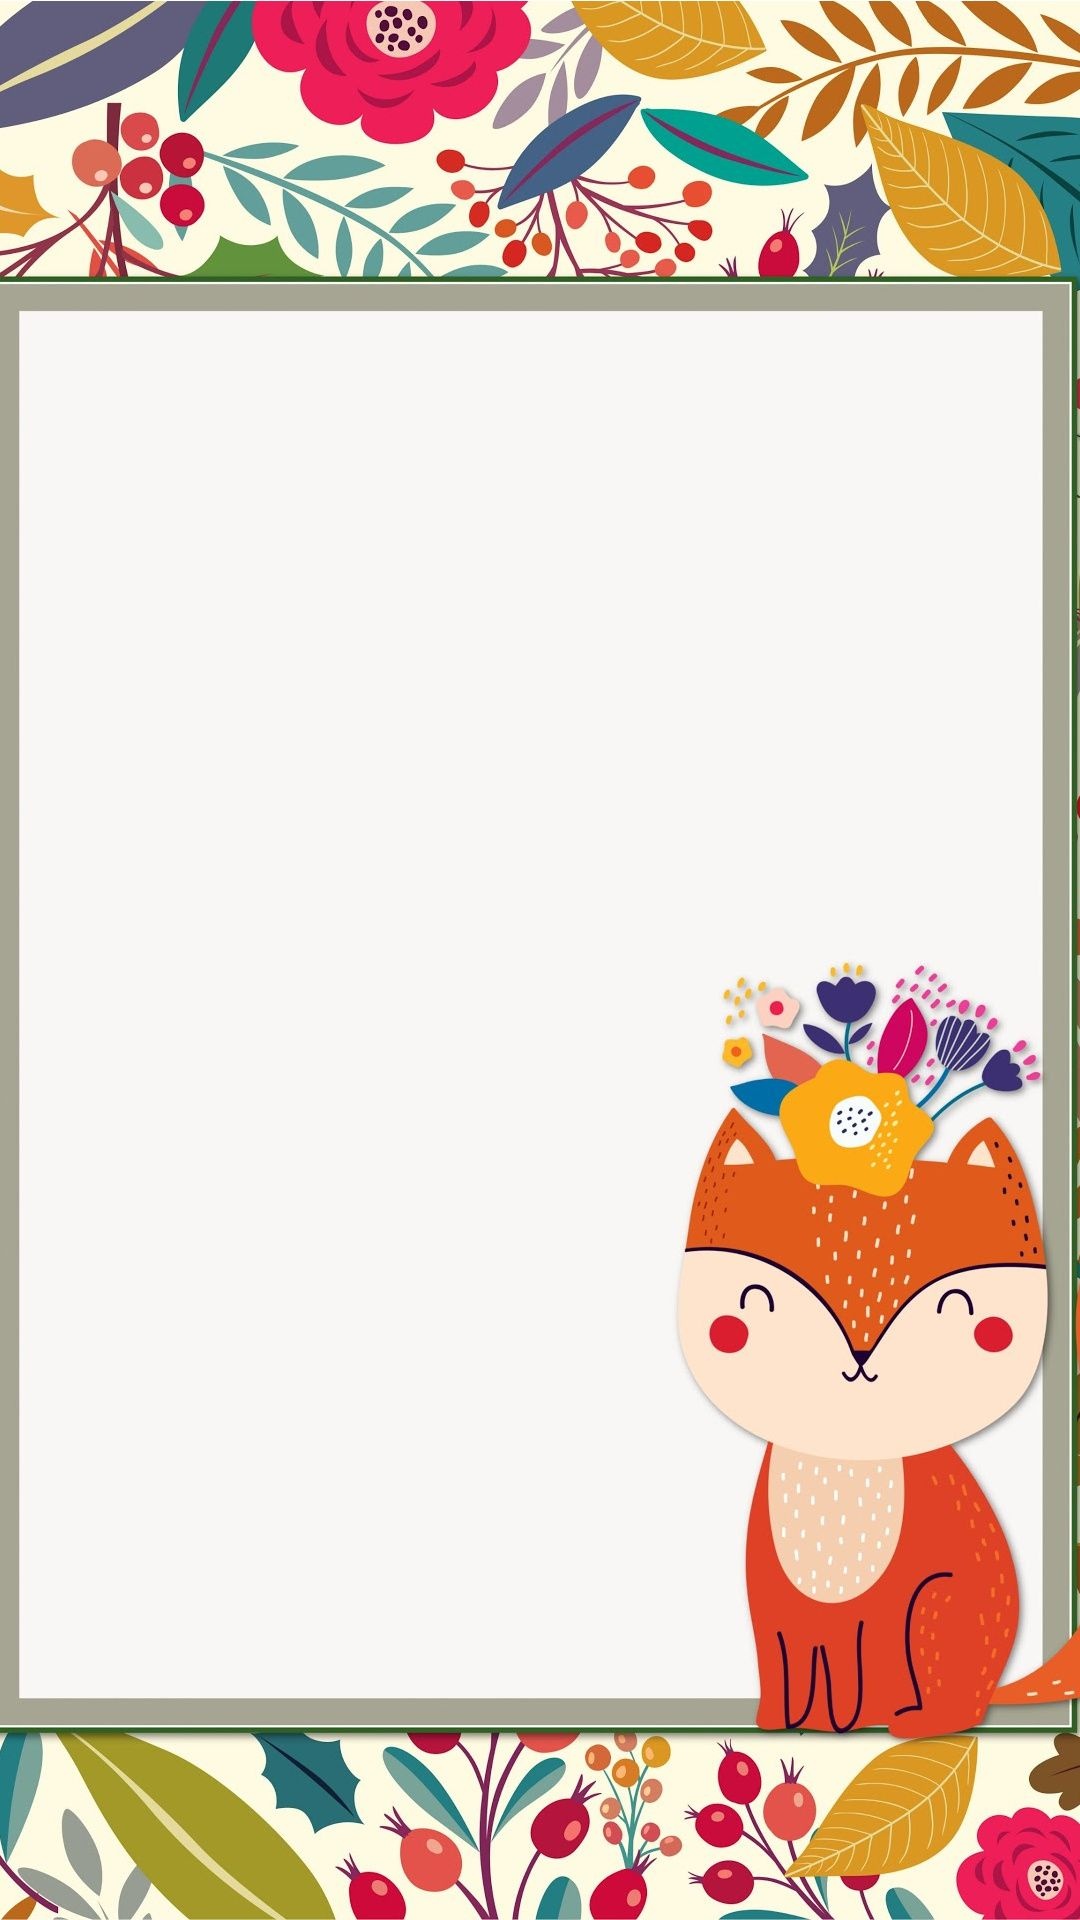 vertical illustration with white space to write your own message. Floral border with a cat in the corner